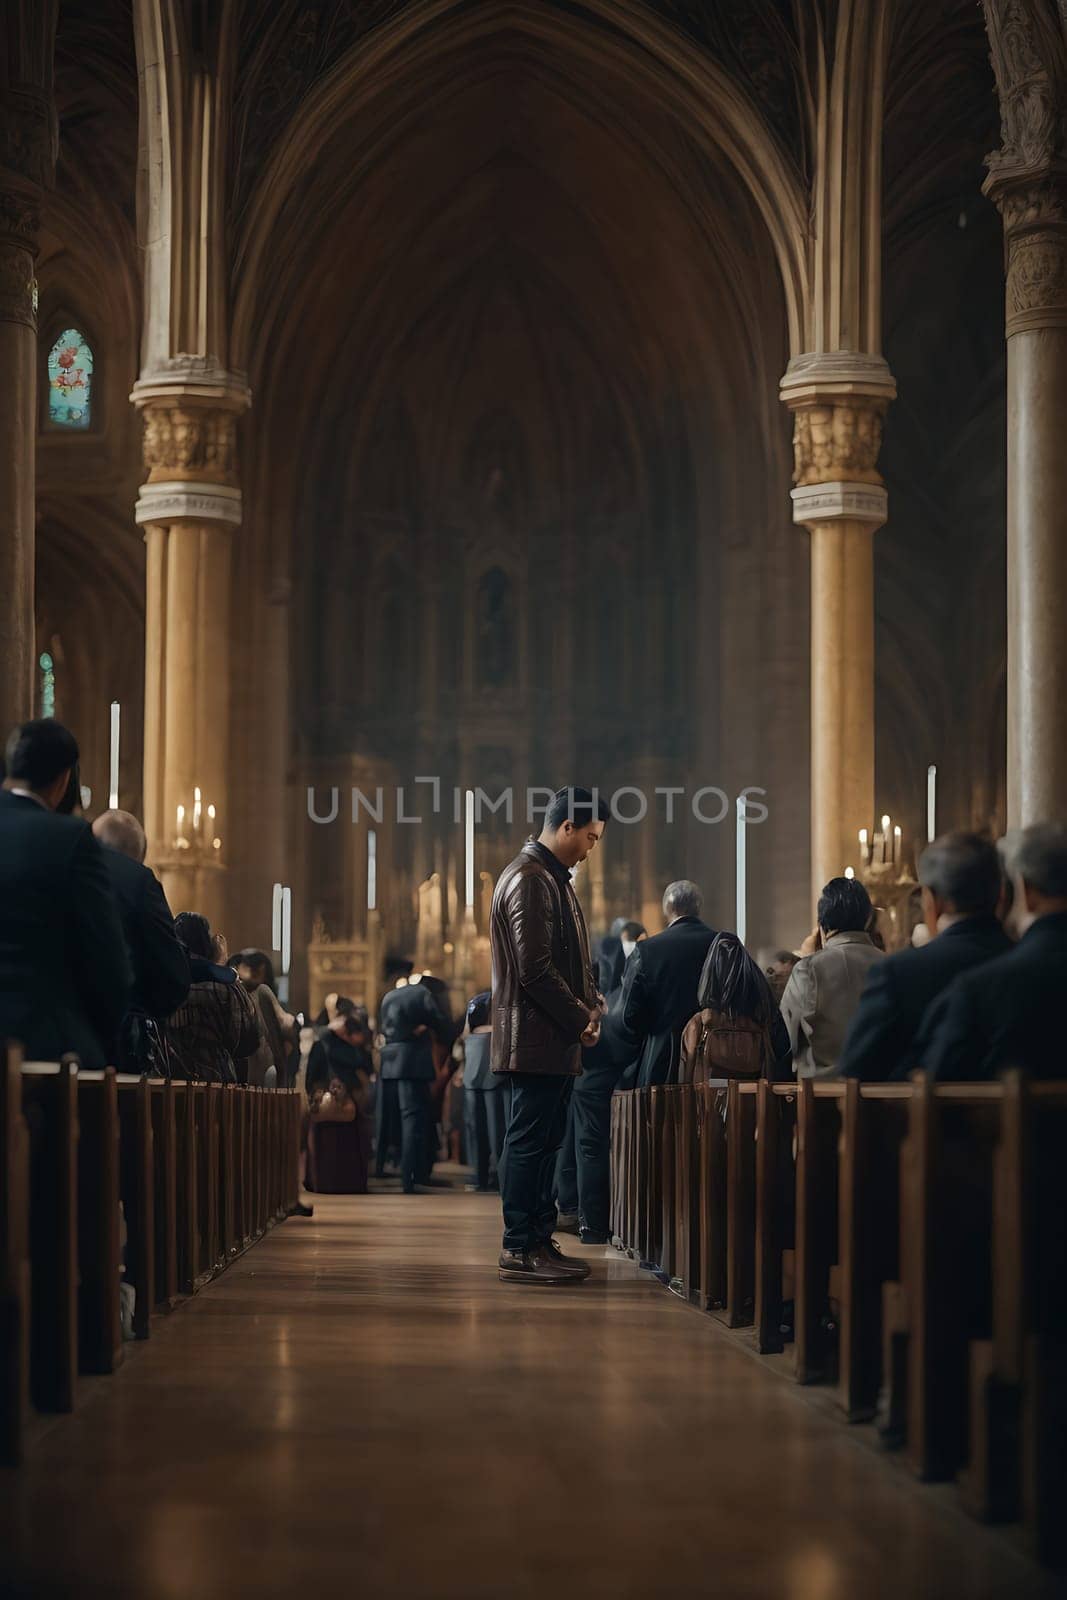 A man standing alone at the far end of the aisle in a church.